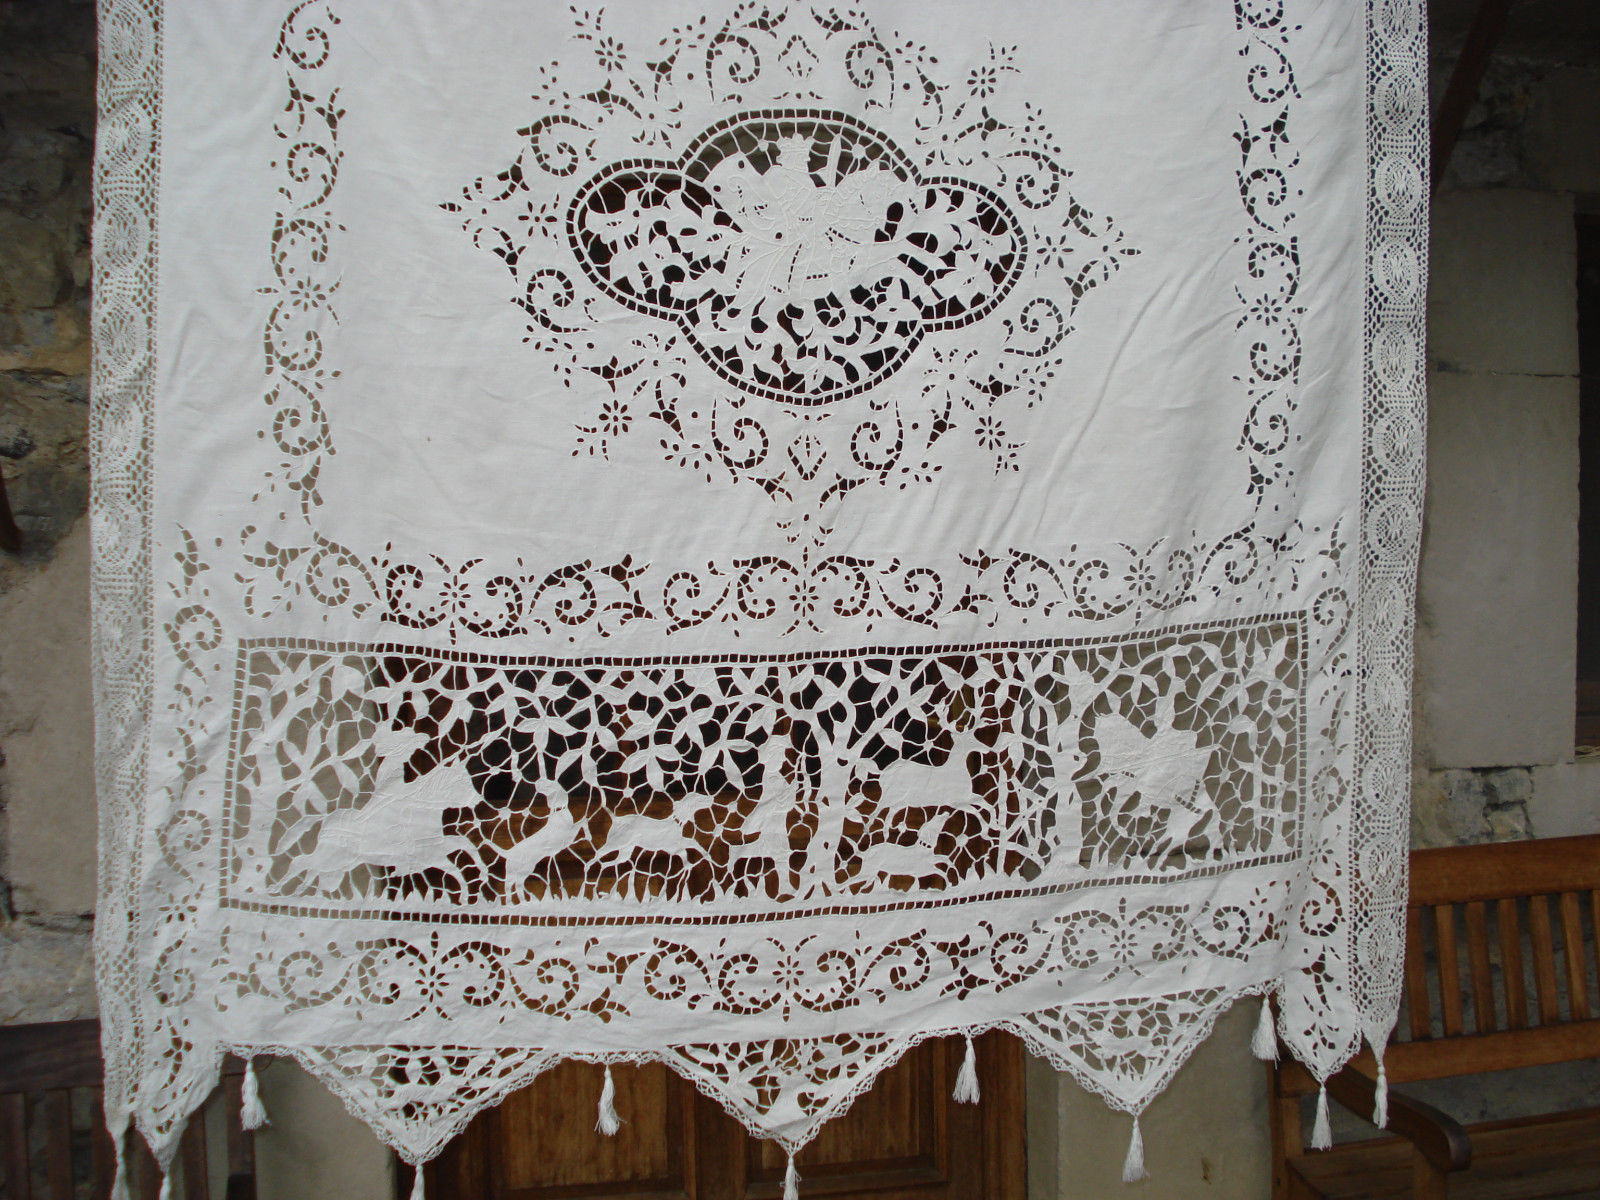 antique french handmade lace + Richelieu embroidery curtain - the king's hunting